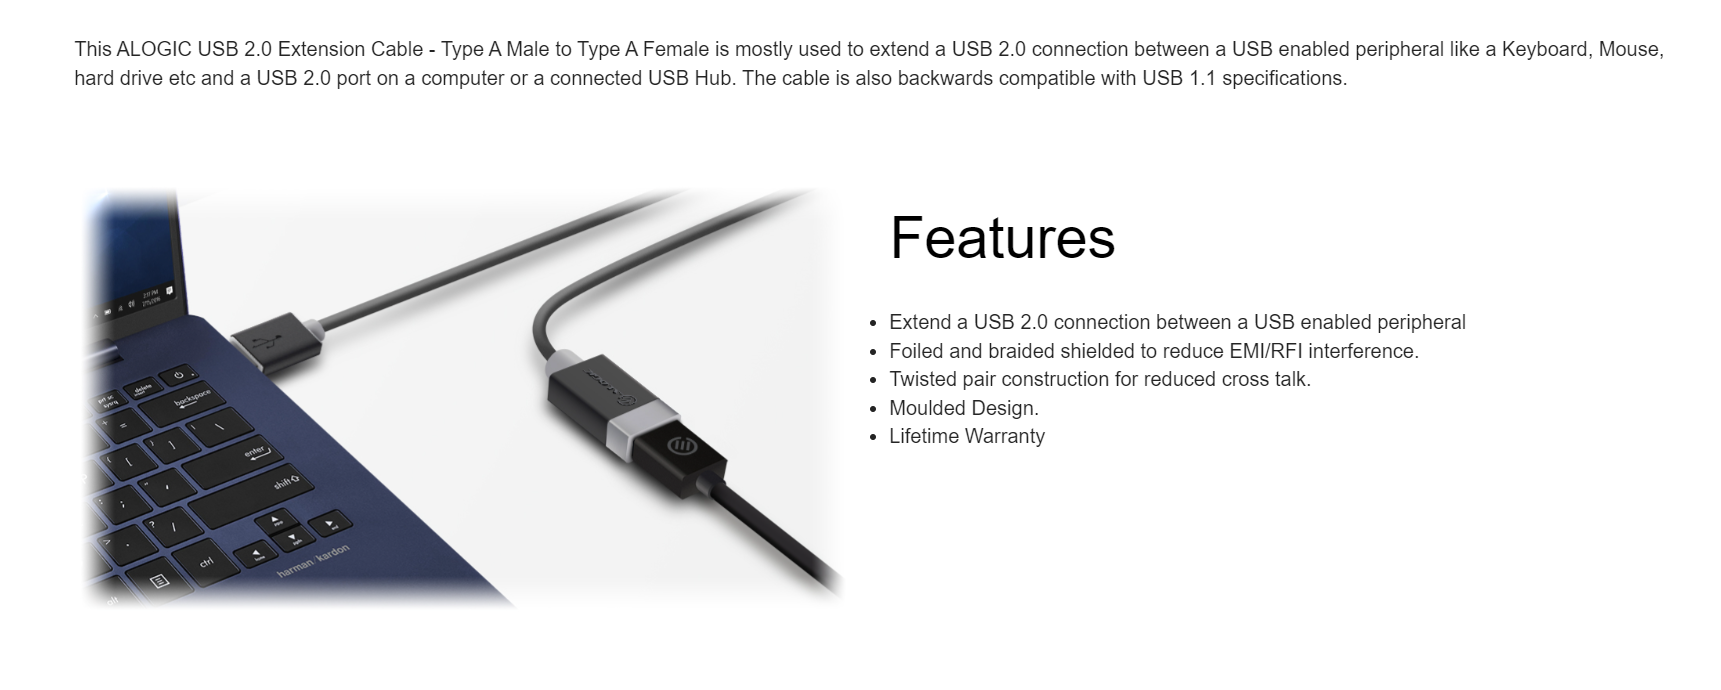 A large marketing image providing additional information about the product ALOGIC USB 2.0 Type-A M-F 2m Extension Cable - Additional alt info not provided